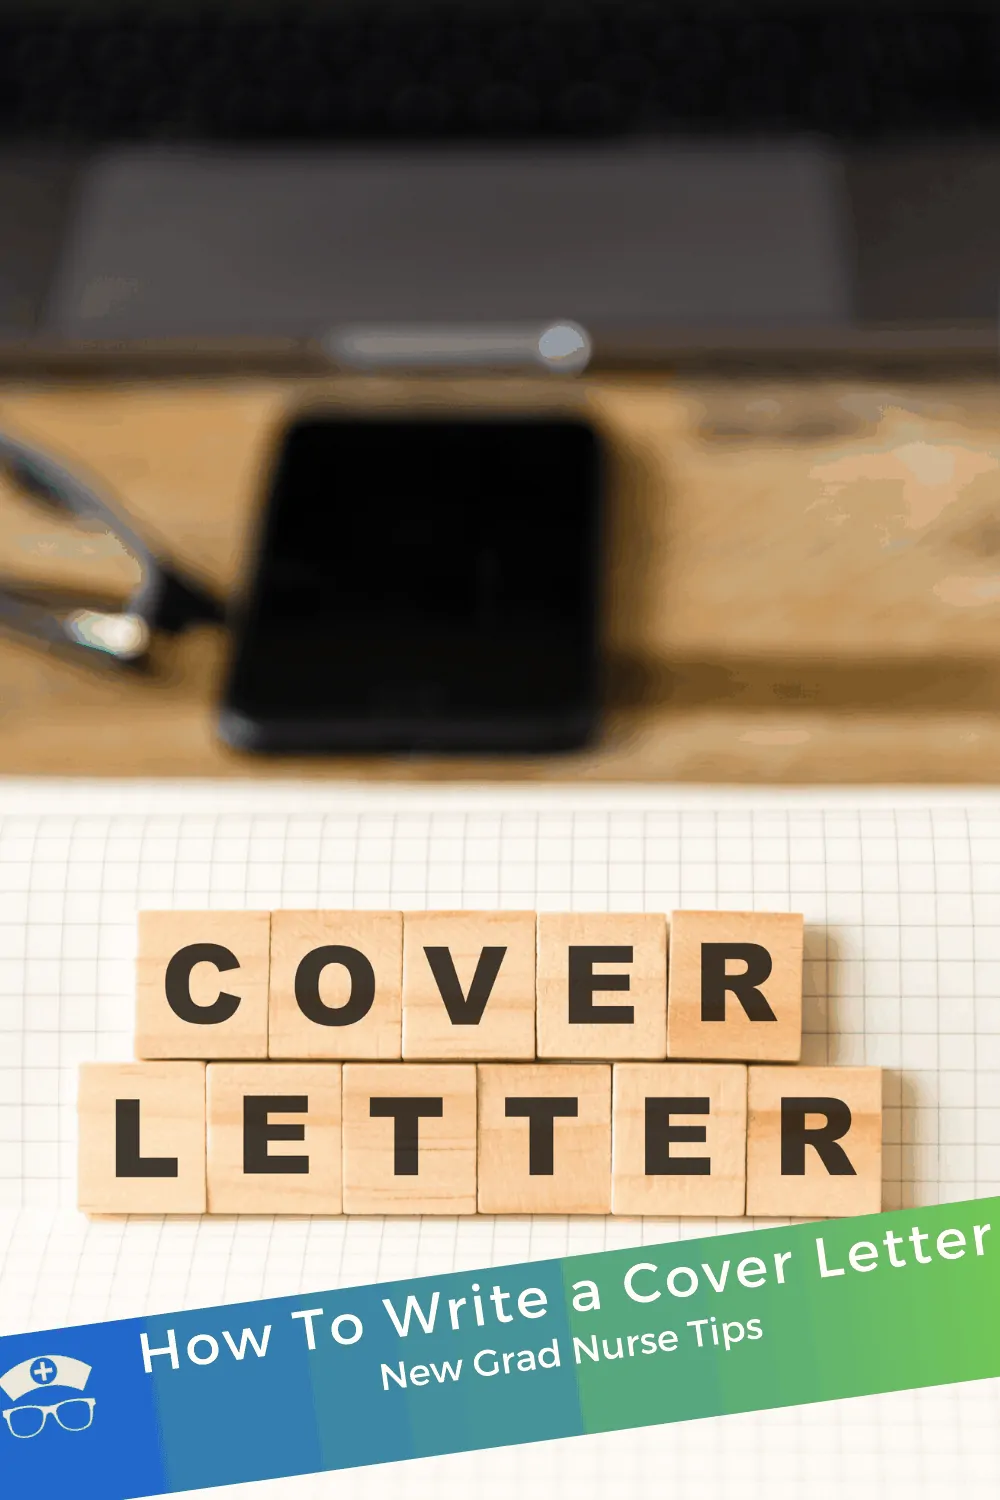 How To Write a Cover Letter New Grad Nurse Tips. In this guide, you'll learn what to include in your cover letter and how to write it. You'll also have access to example cover letters and templates. #thenerdynurse #nurse #nurses #coverletter #nurseresume #nursejobs #gettinghired